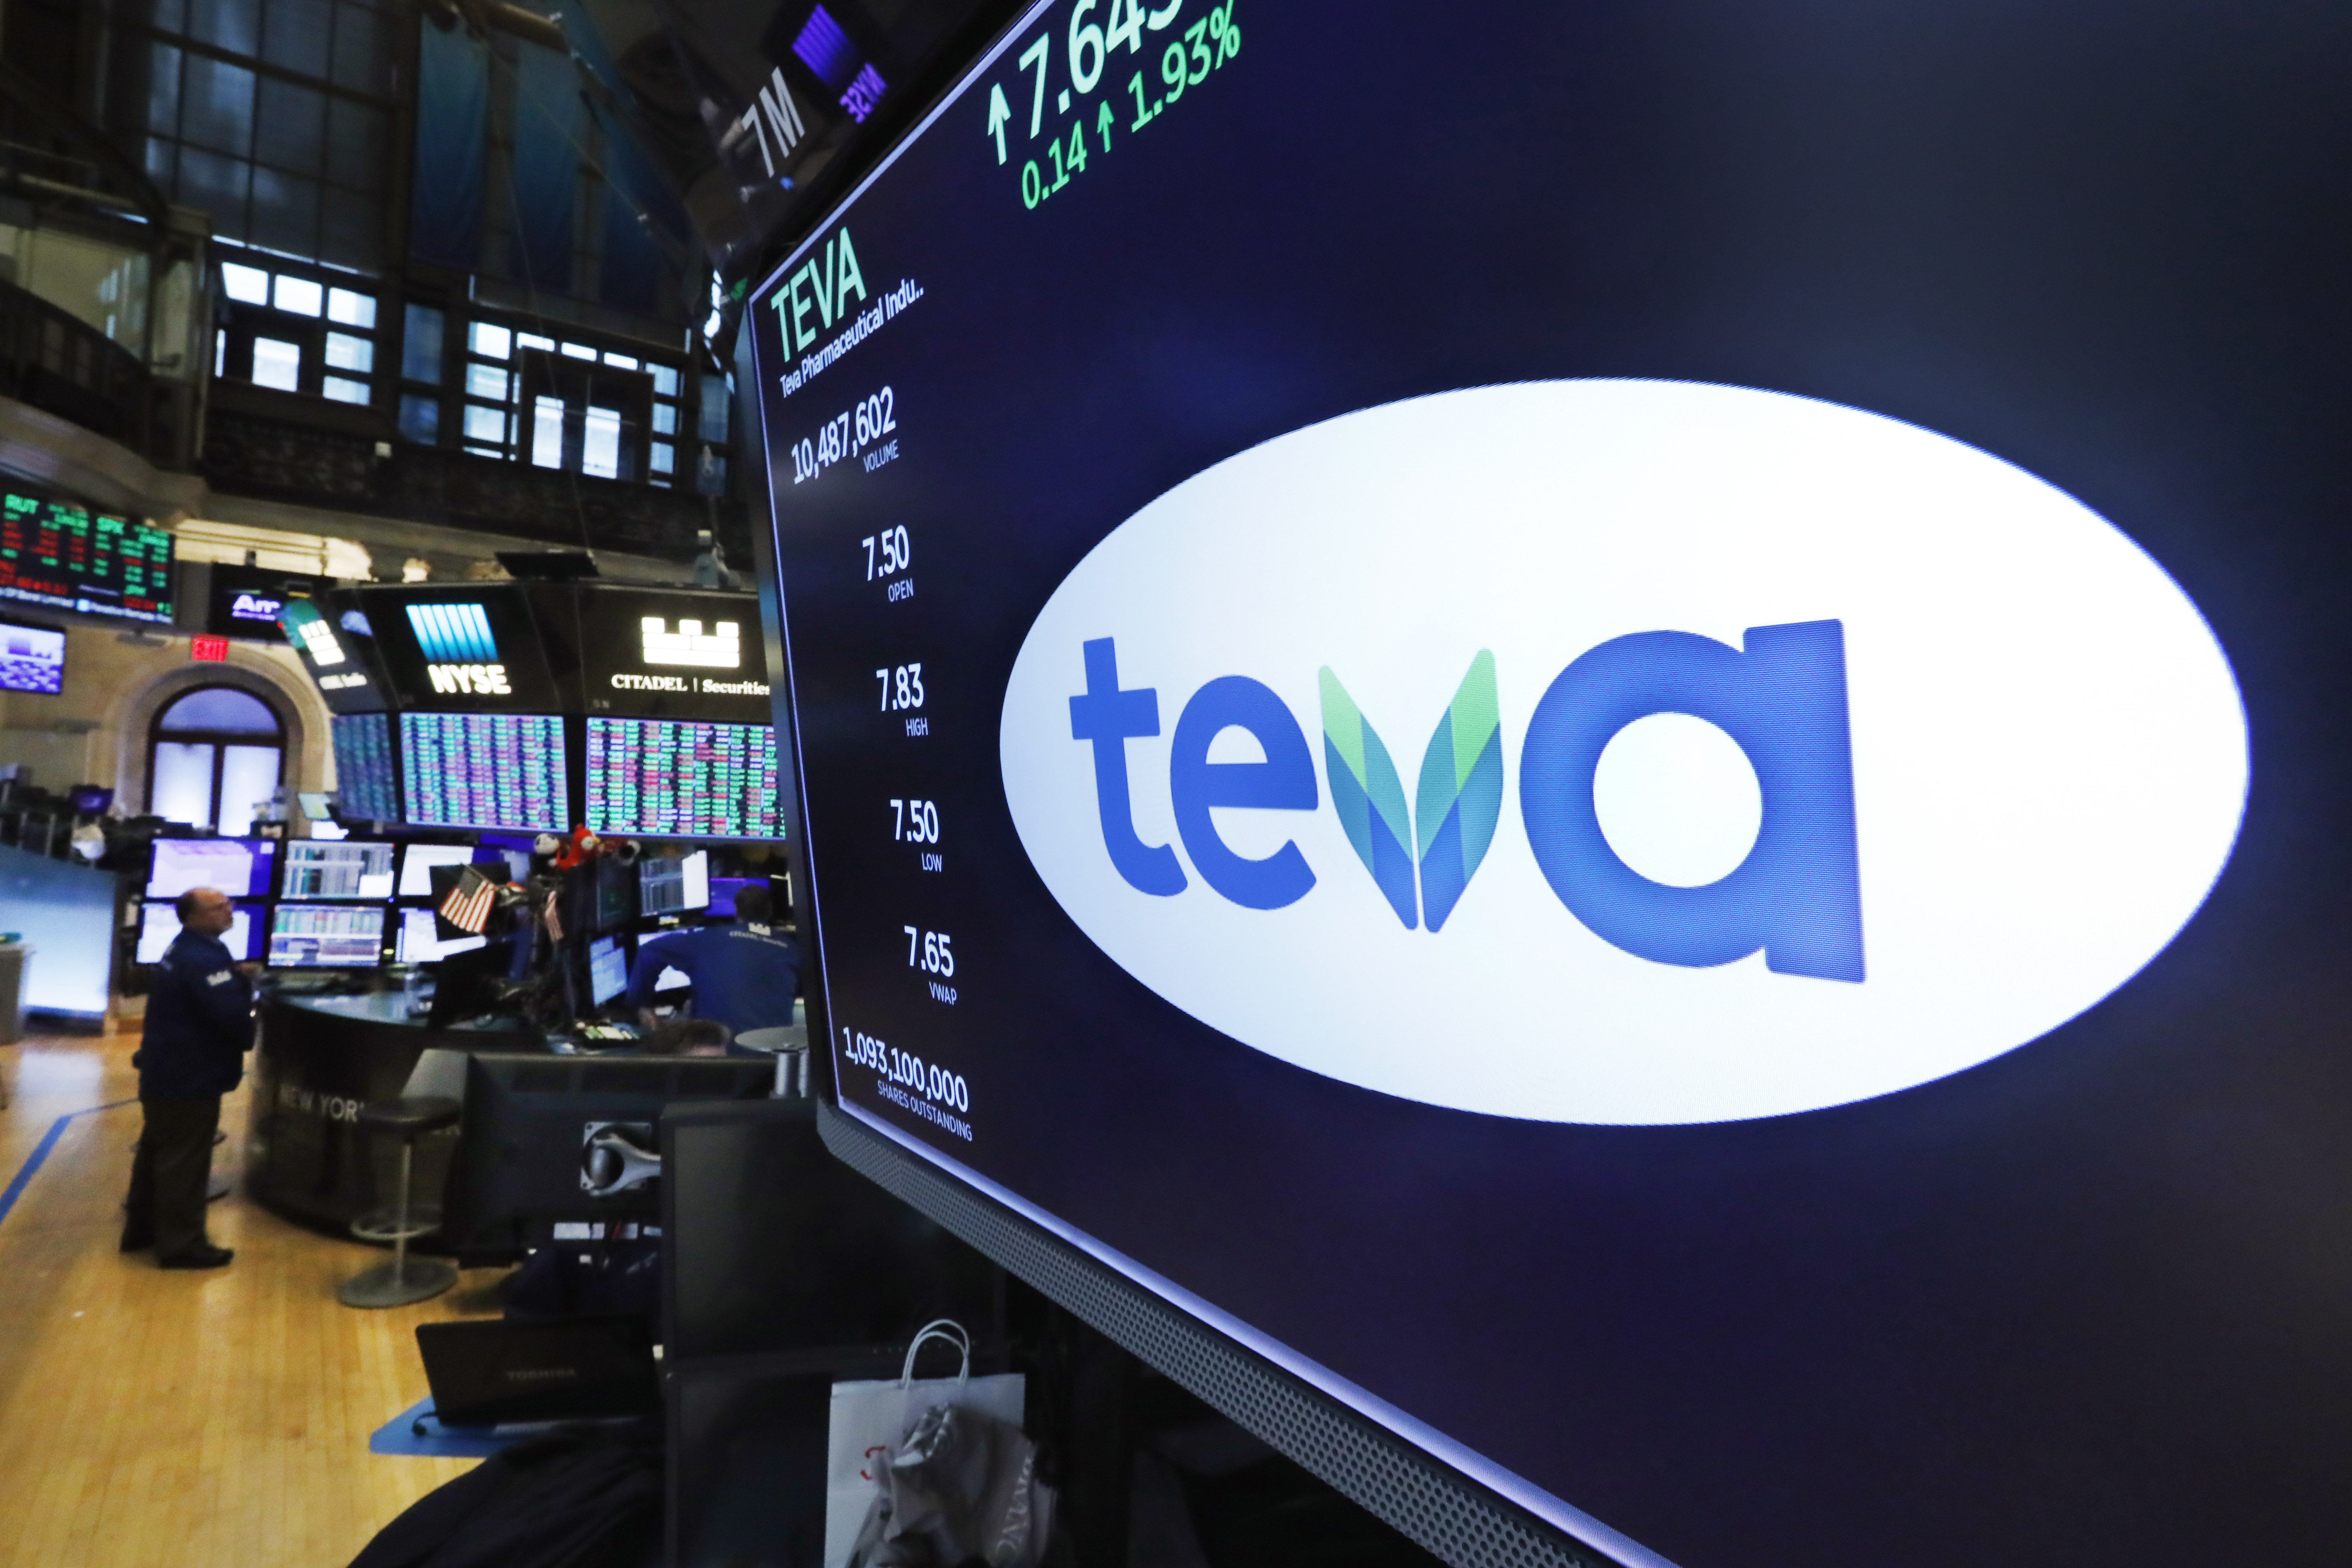 U.S. to charge Teva with to raise prices of generic drugs, sources say - The Globe and Mail